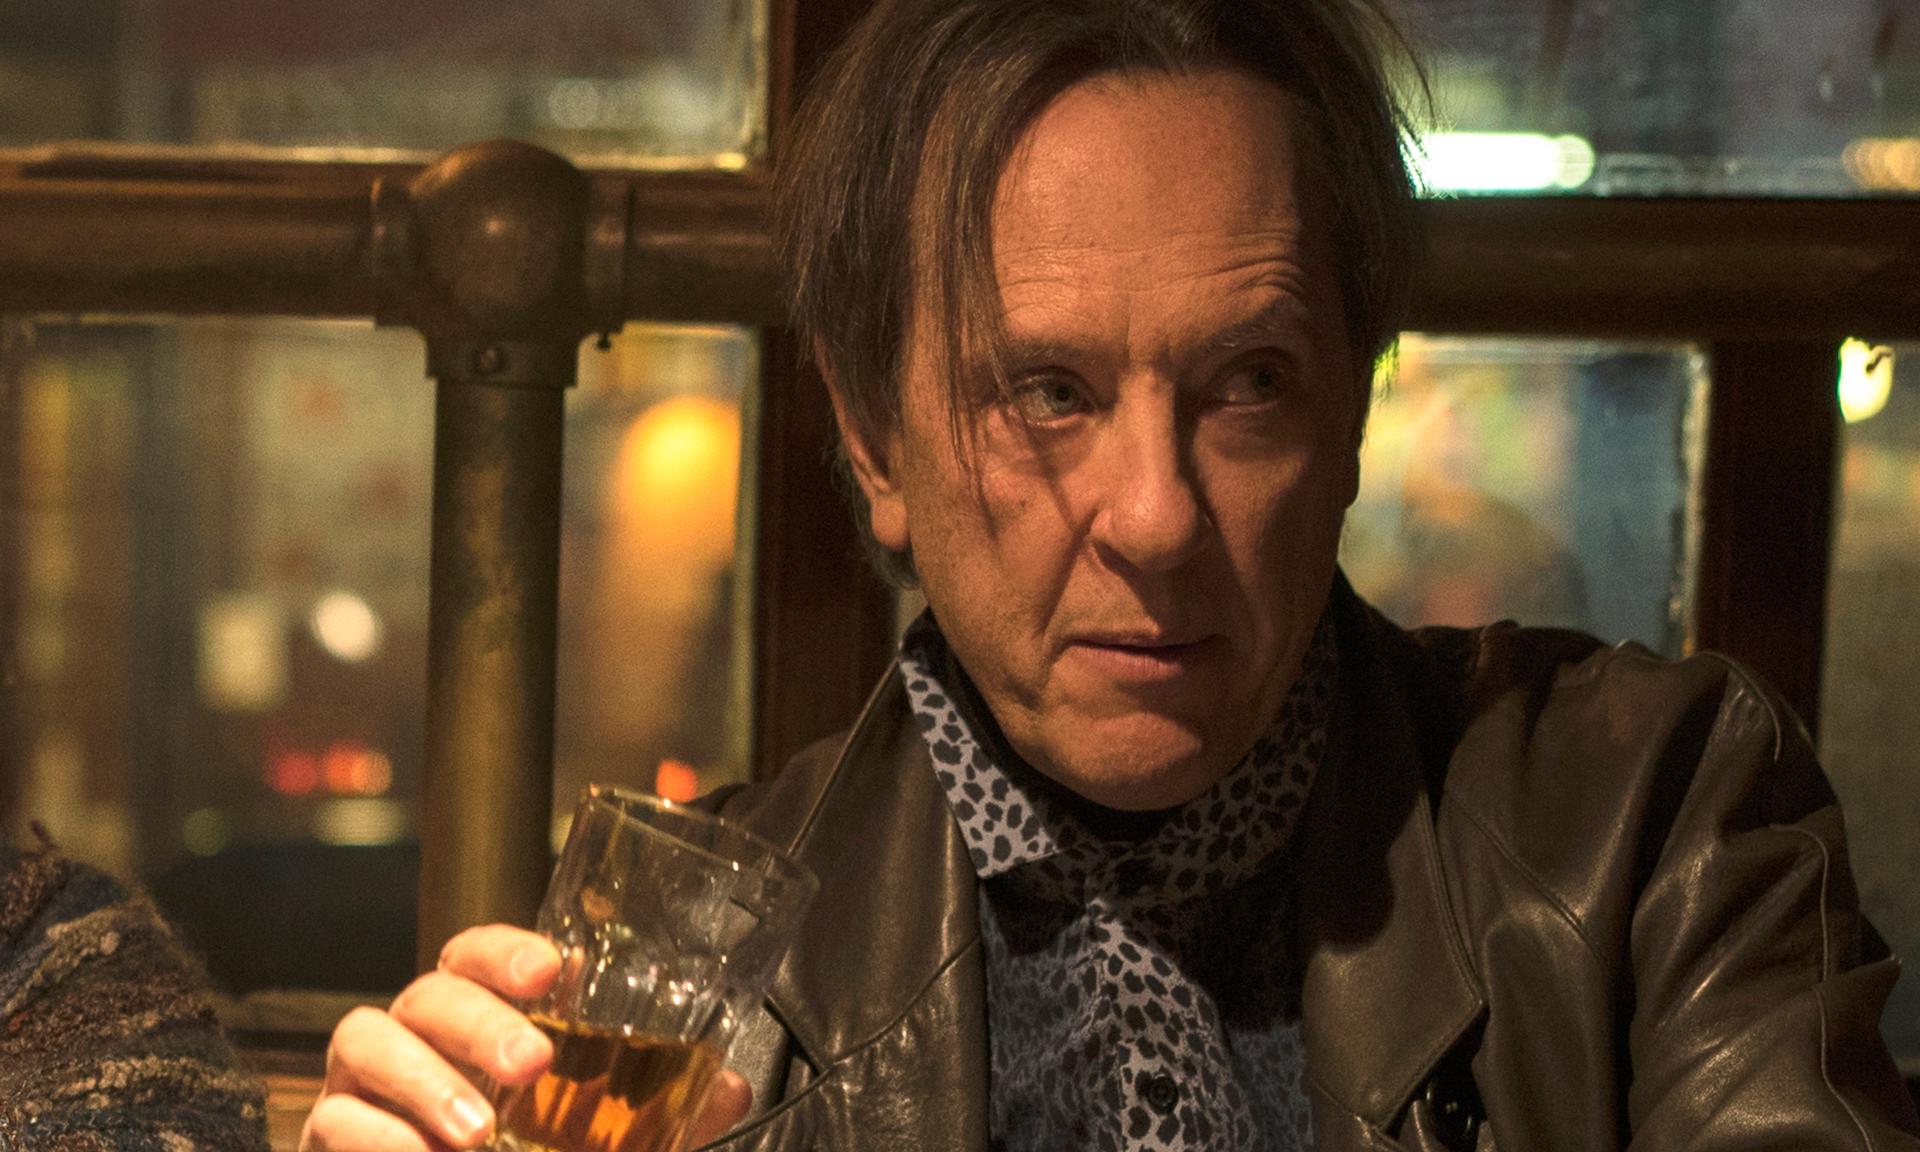 Richard E. Grant in “Can You Ever Forgive Me?”